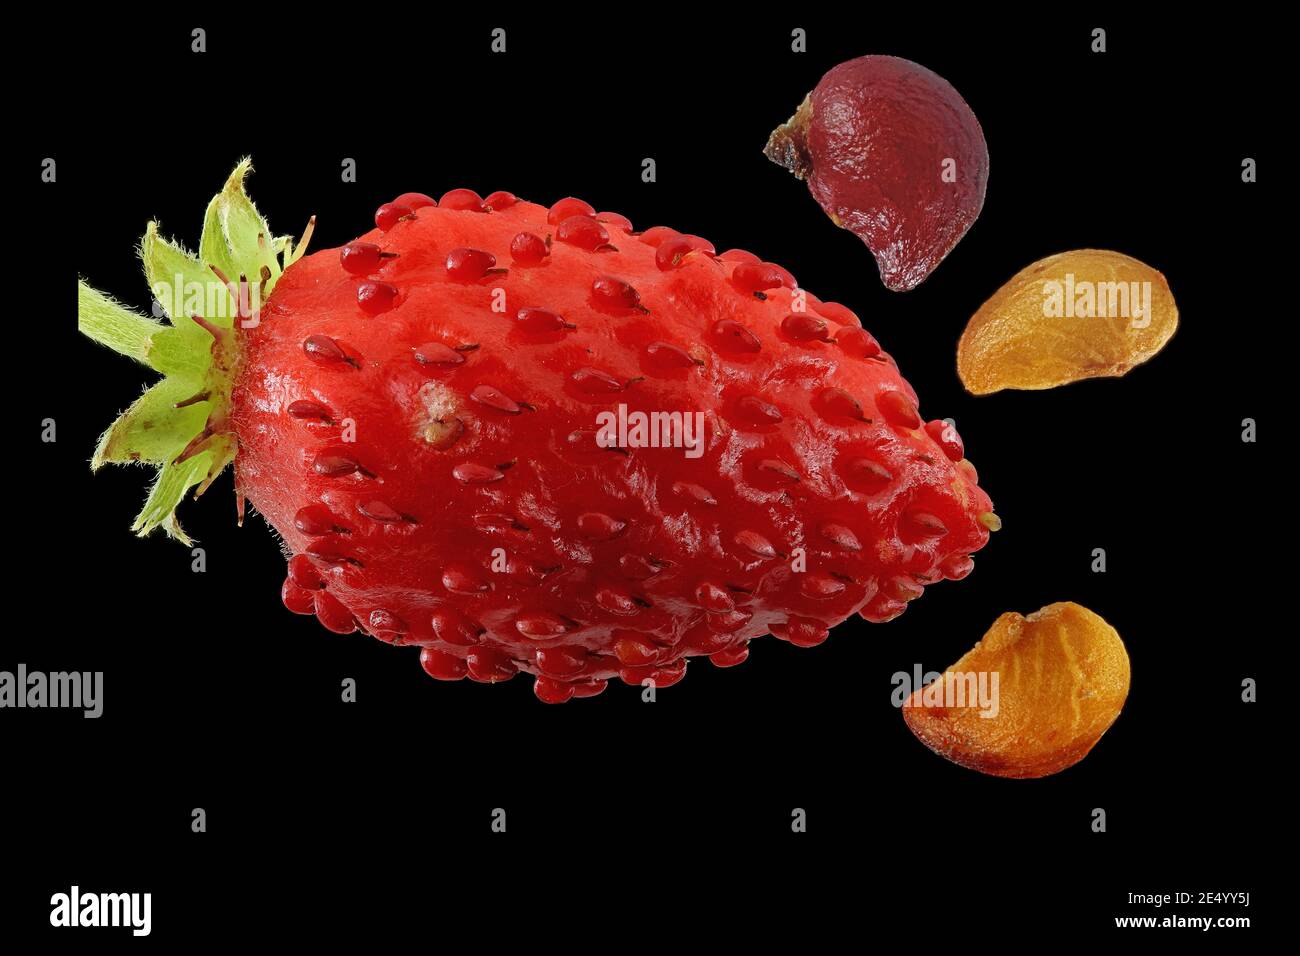 Fragaria vesca, Wild strawberry, Wald-Erdbeere, close up, fruit and seeds Stock Photo